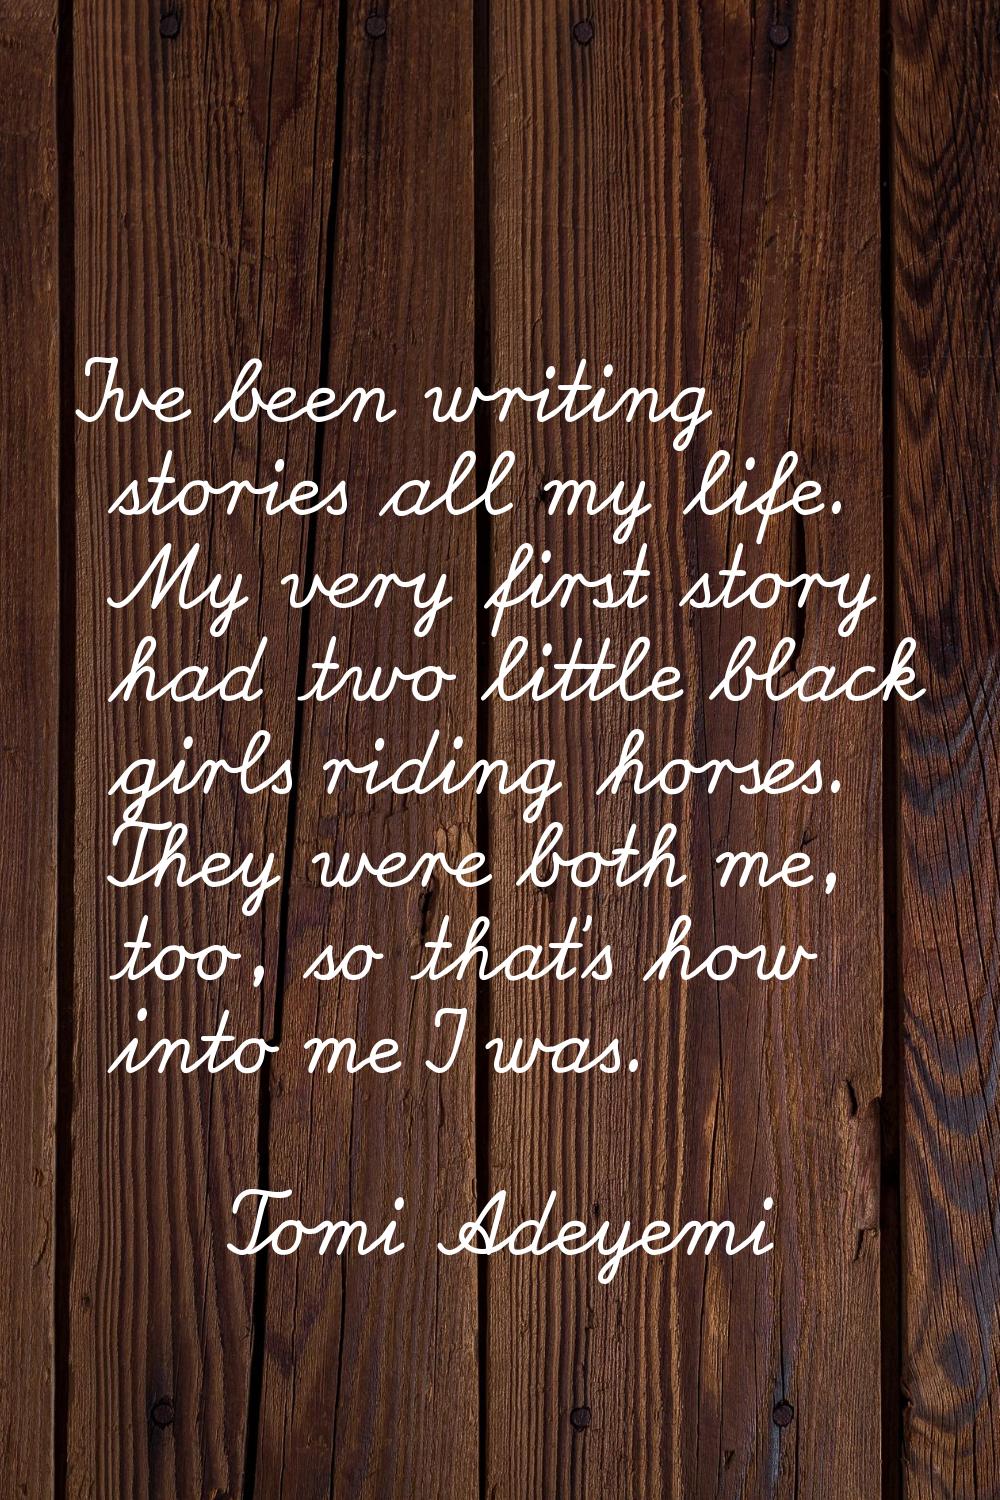 I've been writing stories all my life. My very first story had two little black girls riding horses